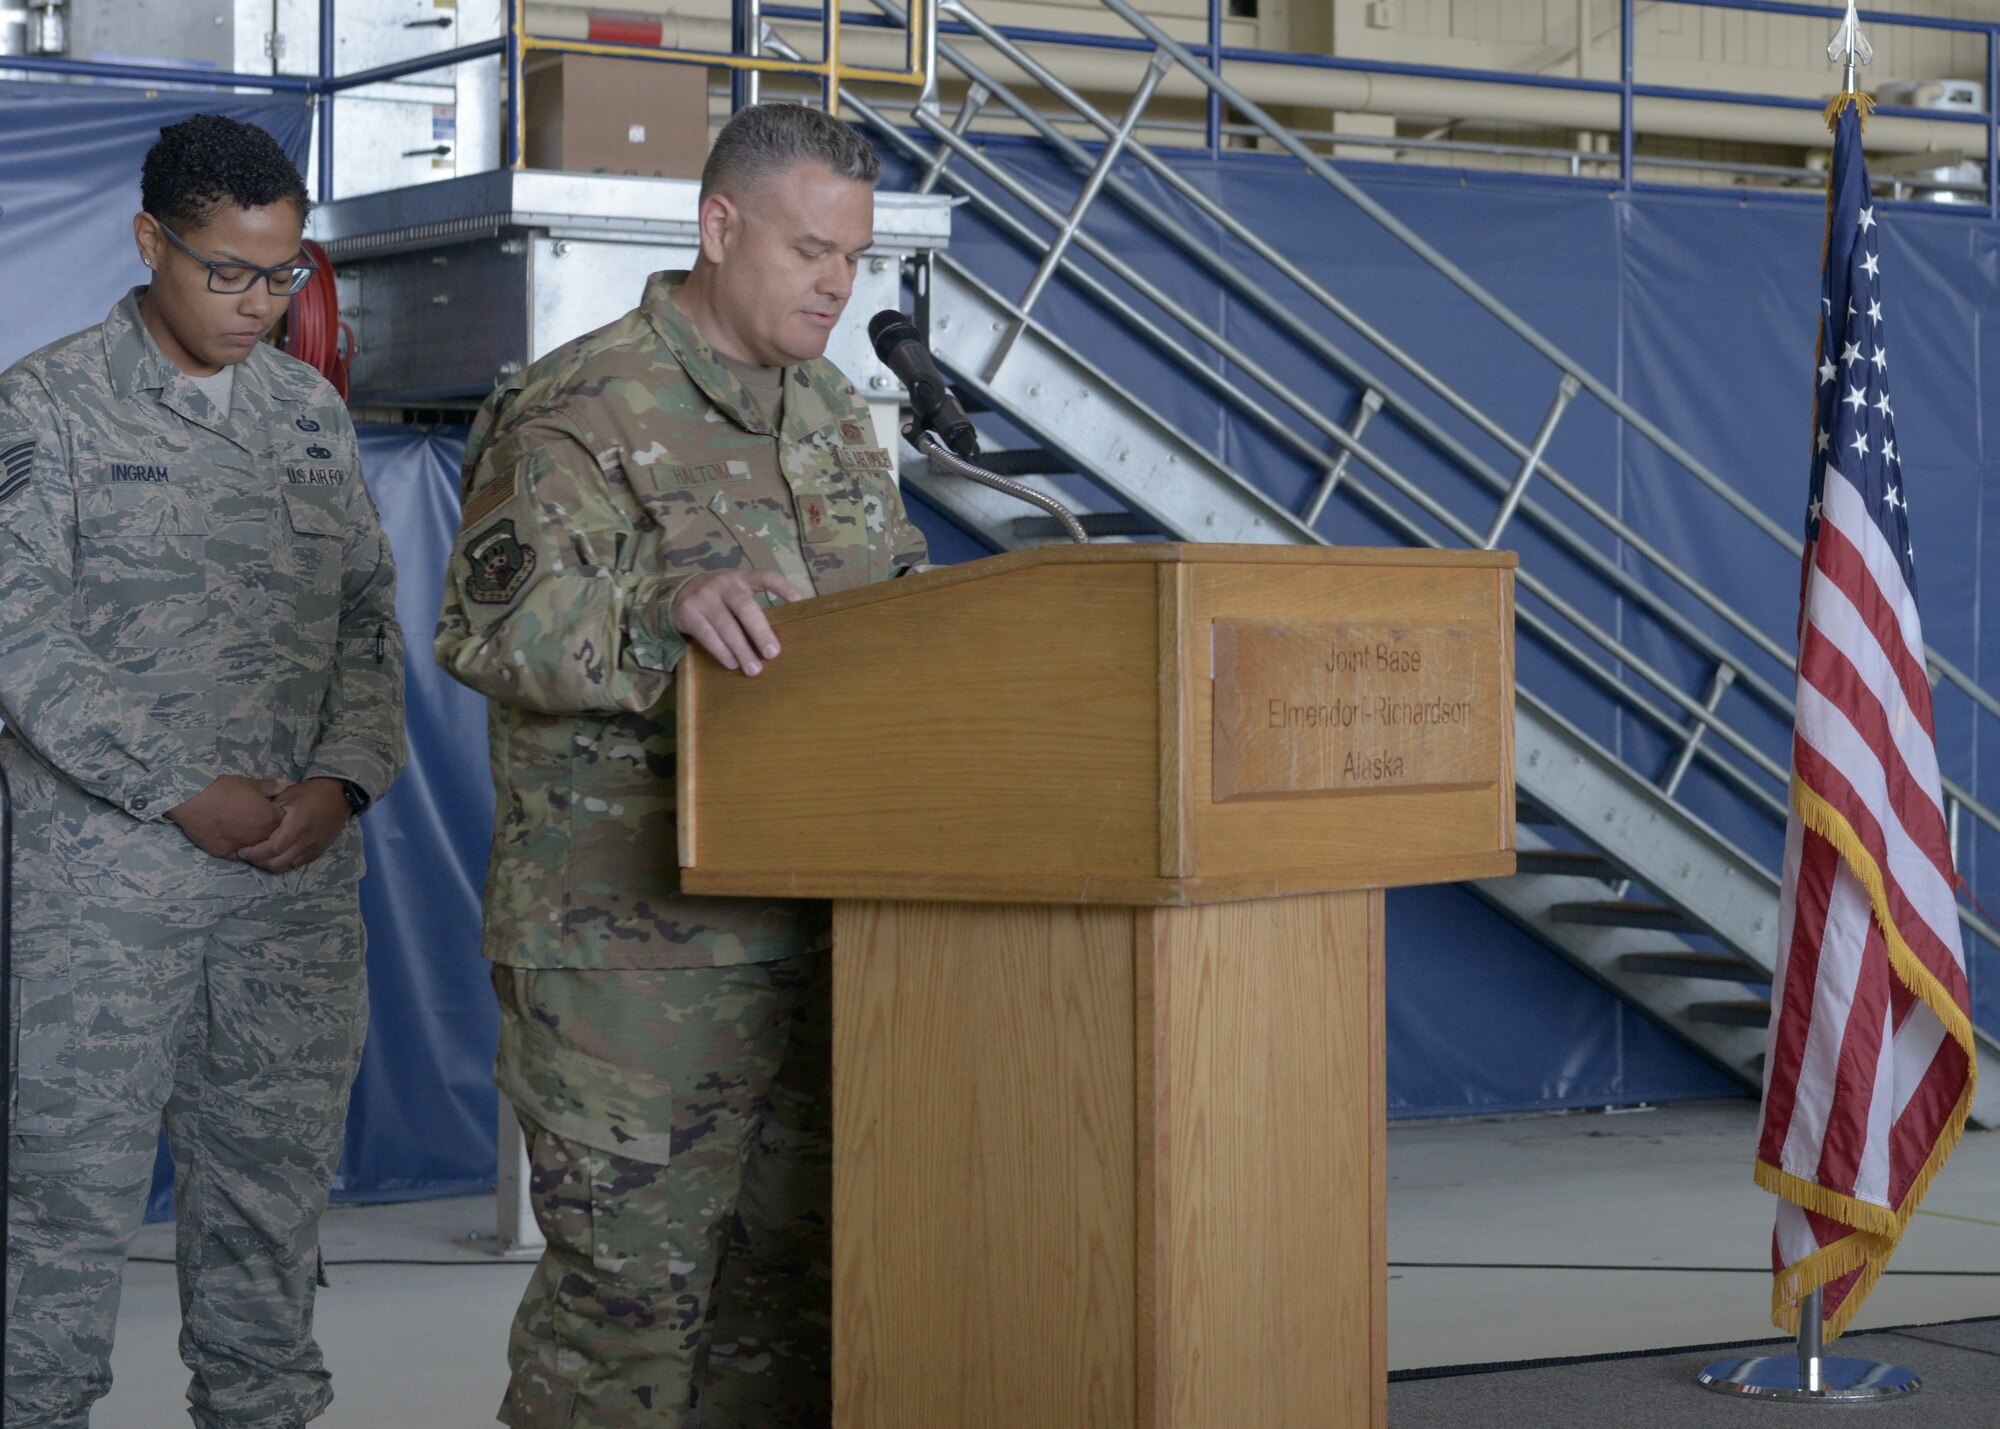 U.S. Air Force Maj. Dave Halton, 3rd Wing chaplain, gives the invocation during the opening ceremony for the 3rd Wing’s 100th anniversary celebration on Joint Base Elmendorf-Richardson, Alaska, July 25, 2019.